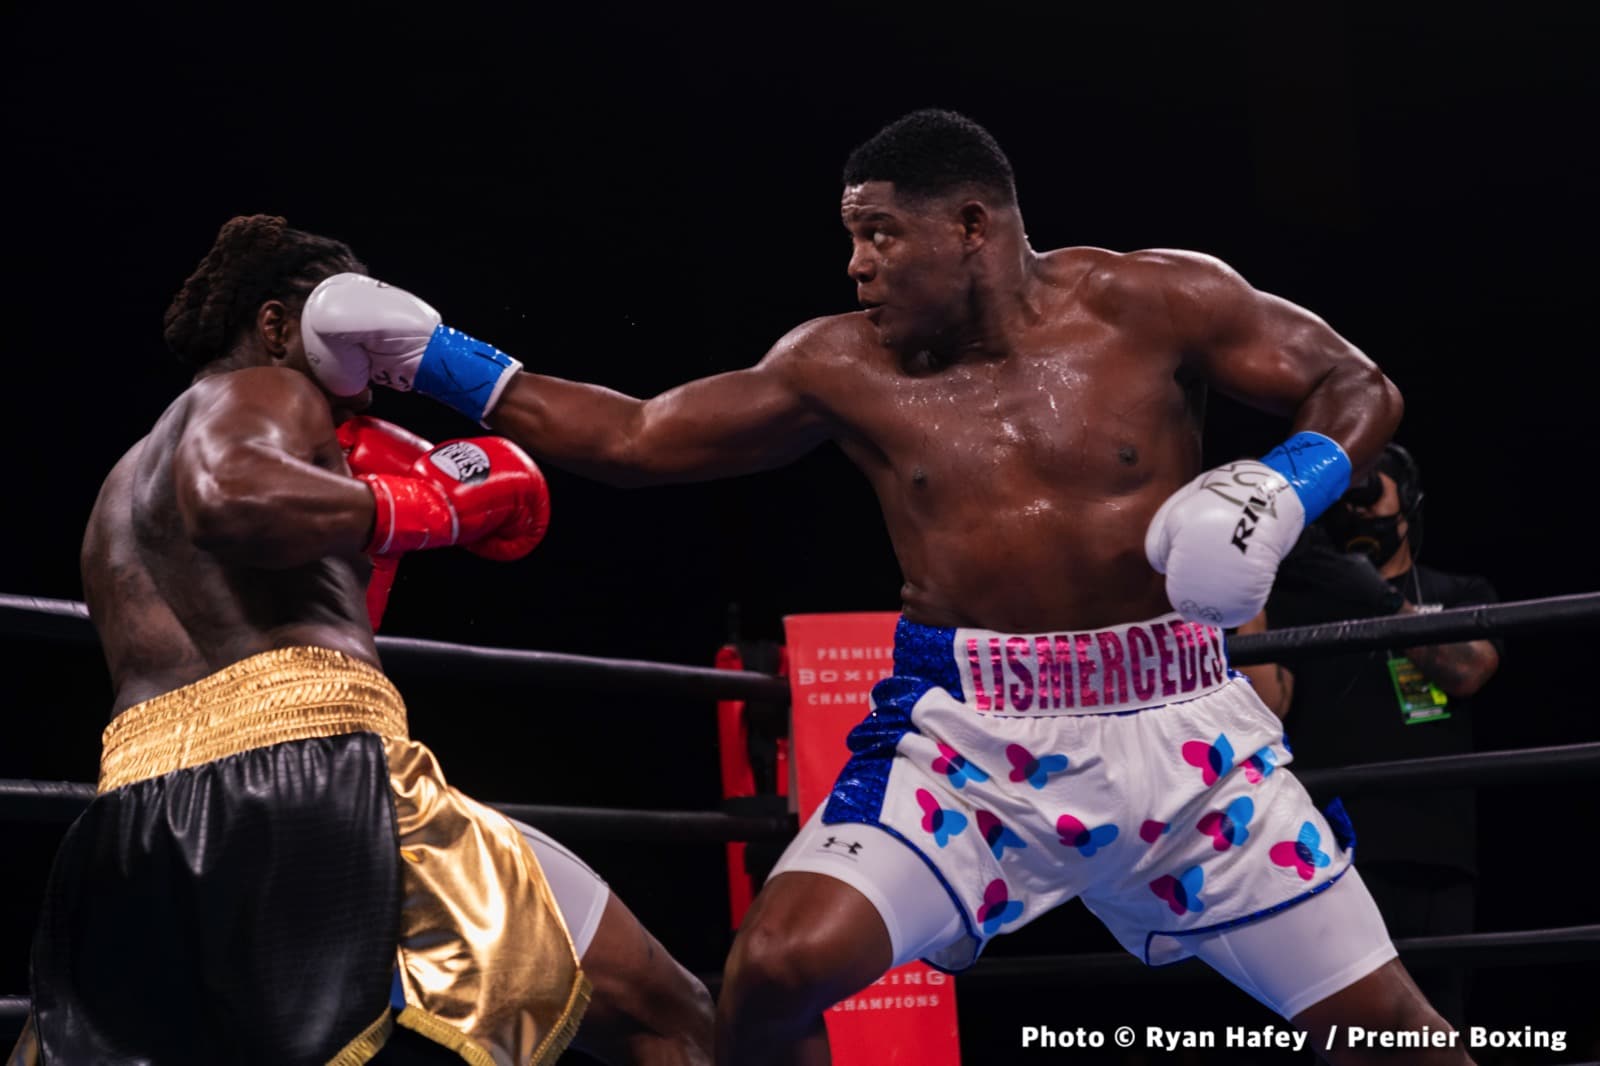 Veteran Luis Ortiz climbs up the heavyweight rankings with crashing 6th round knockout of Charles Martin